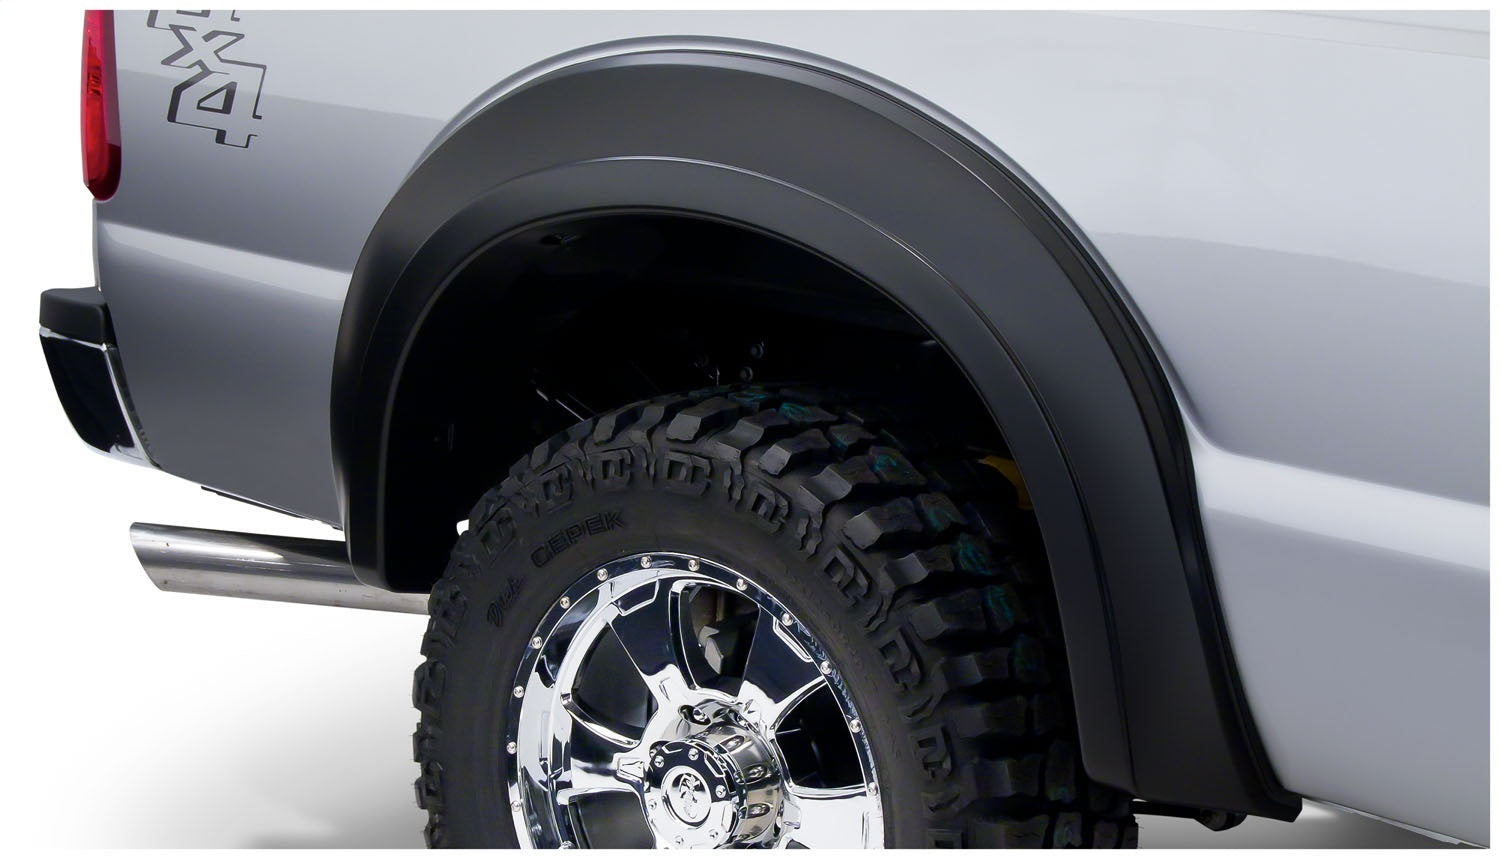 Bushwacker 20086-02 Black Extend-A-Fender Style Smooth Finish Rear Fender Flares for 2011-2016 Ford F-250 & F-350 Super Duty (Excludes Dually)